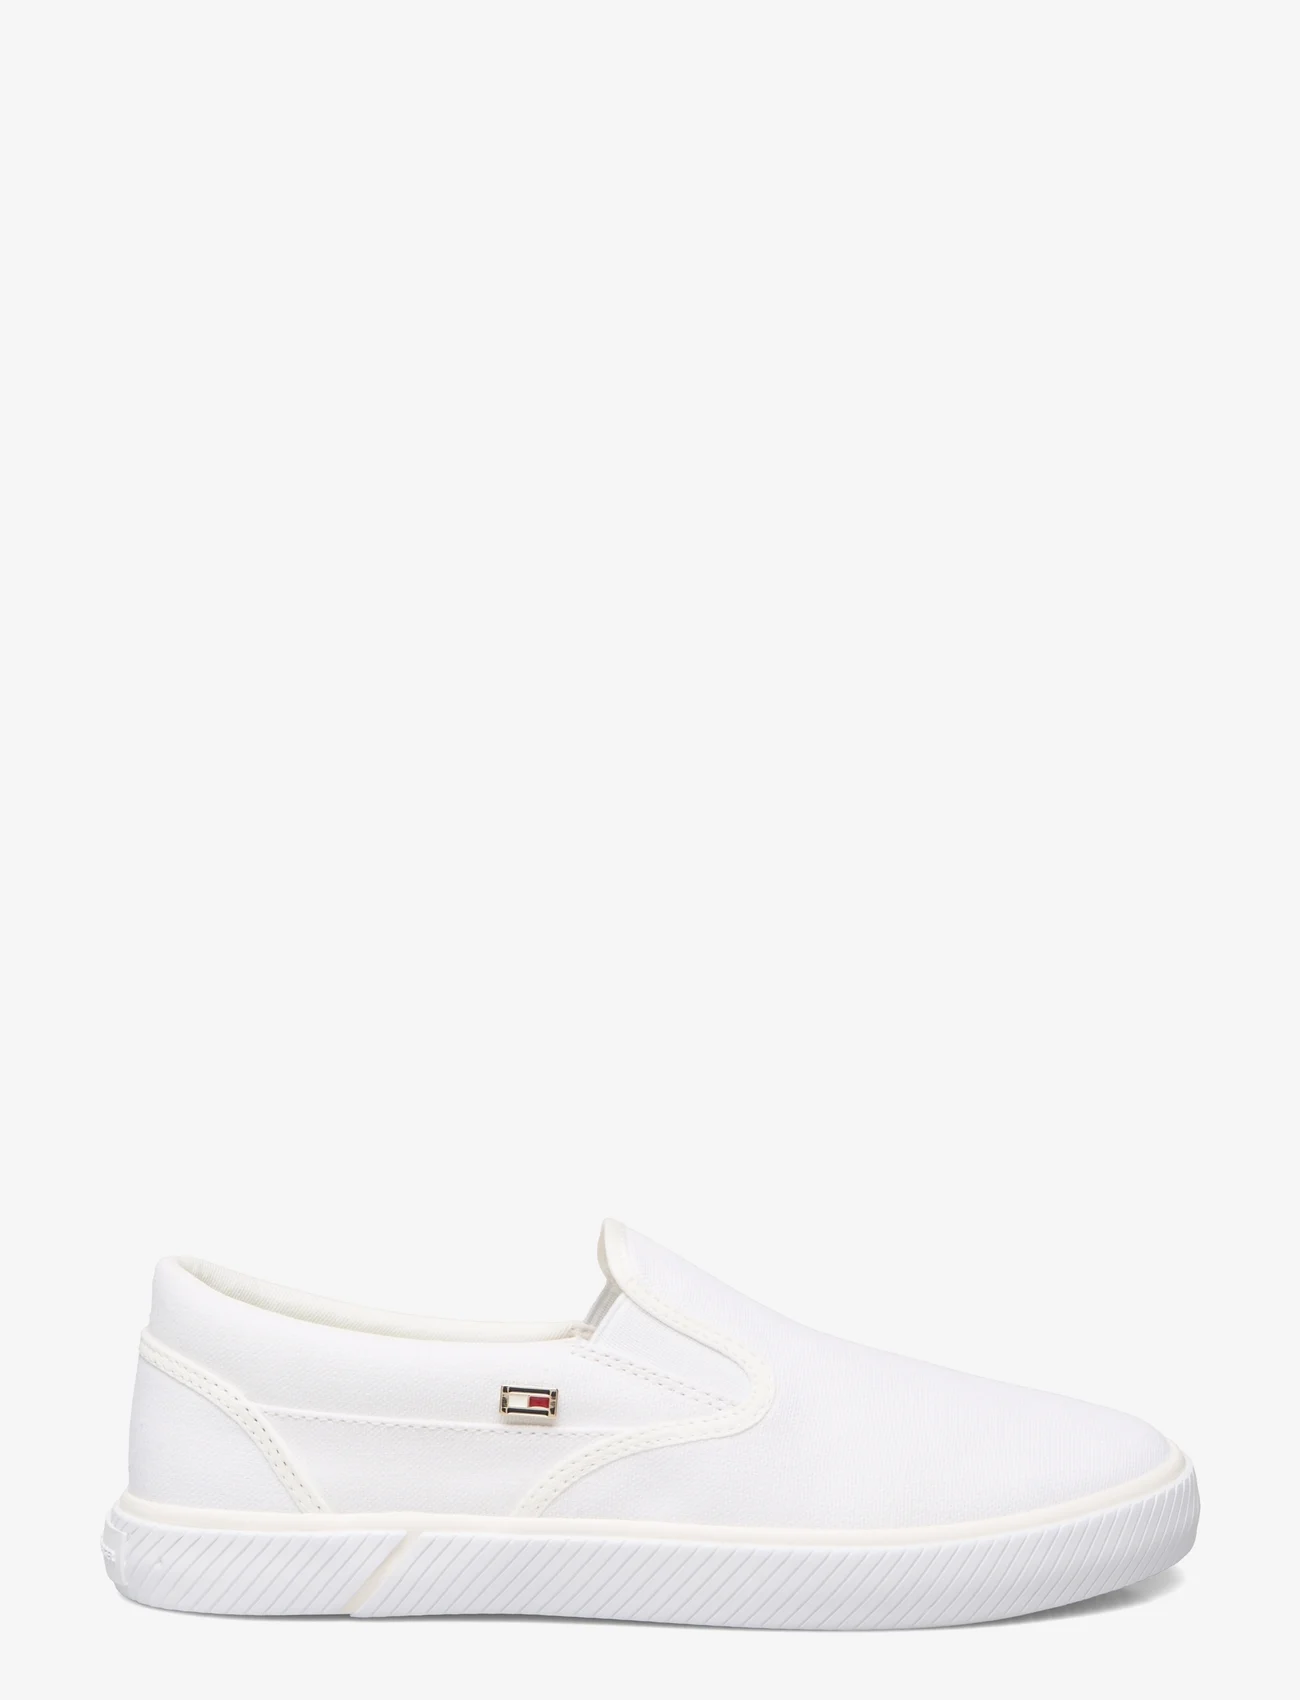 Tommy Hilfiger - VULC CANVAS SLIP-ON SNEAKER - sneakers - white - 1